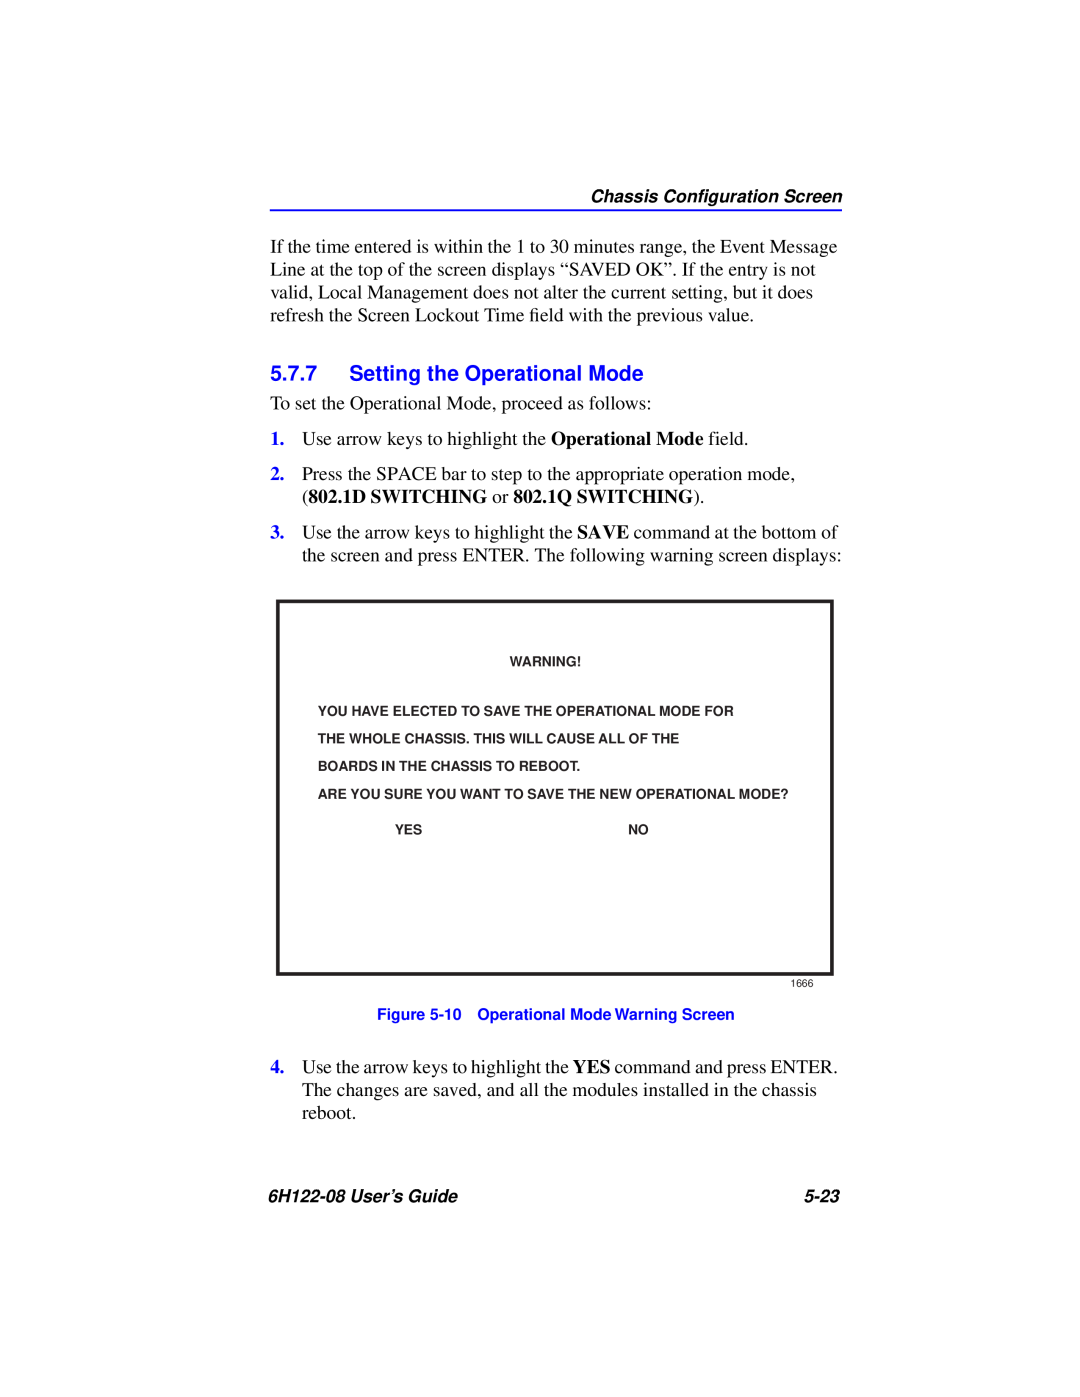 Cabletron Systems 6H122-08 manual Setting the Operational Mode 